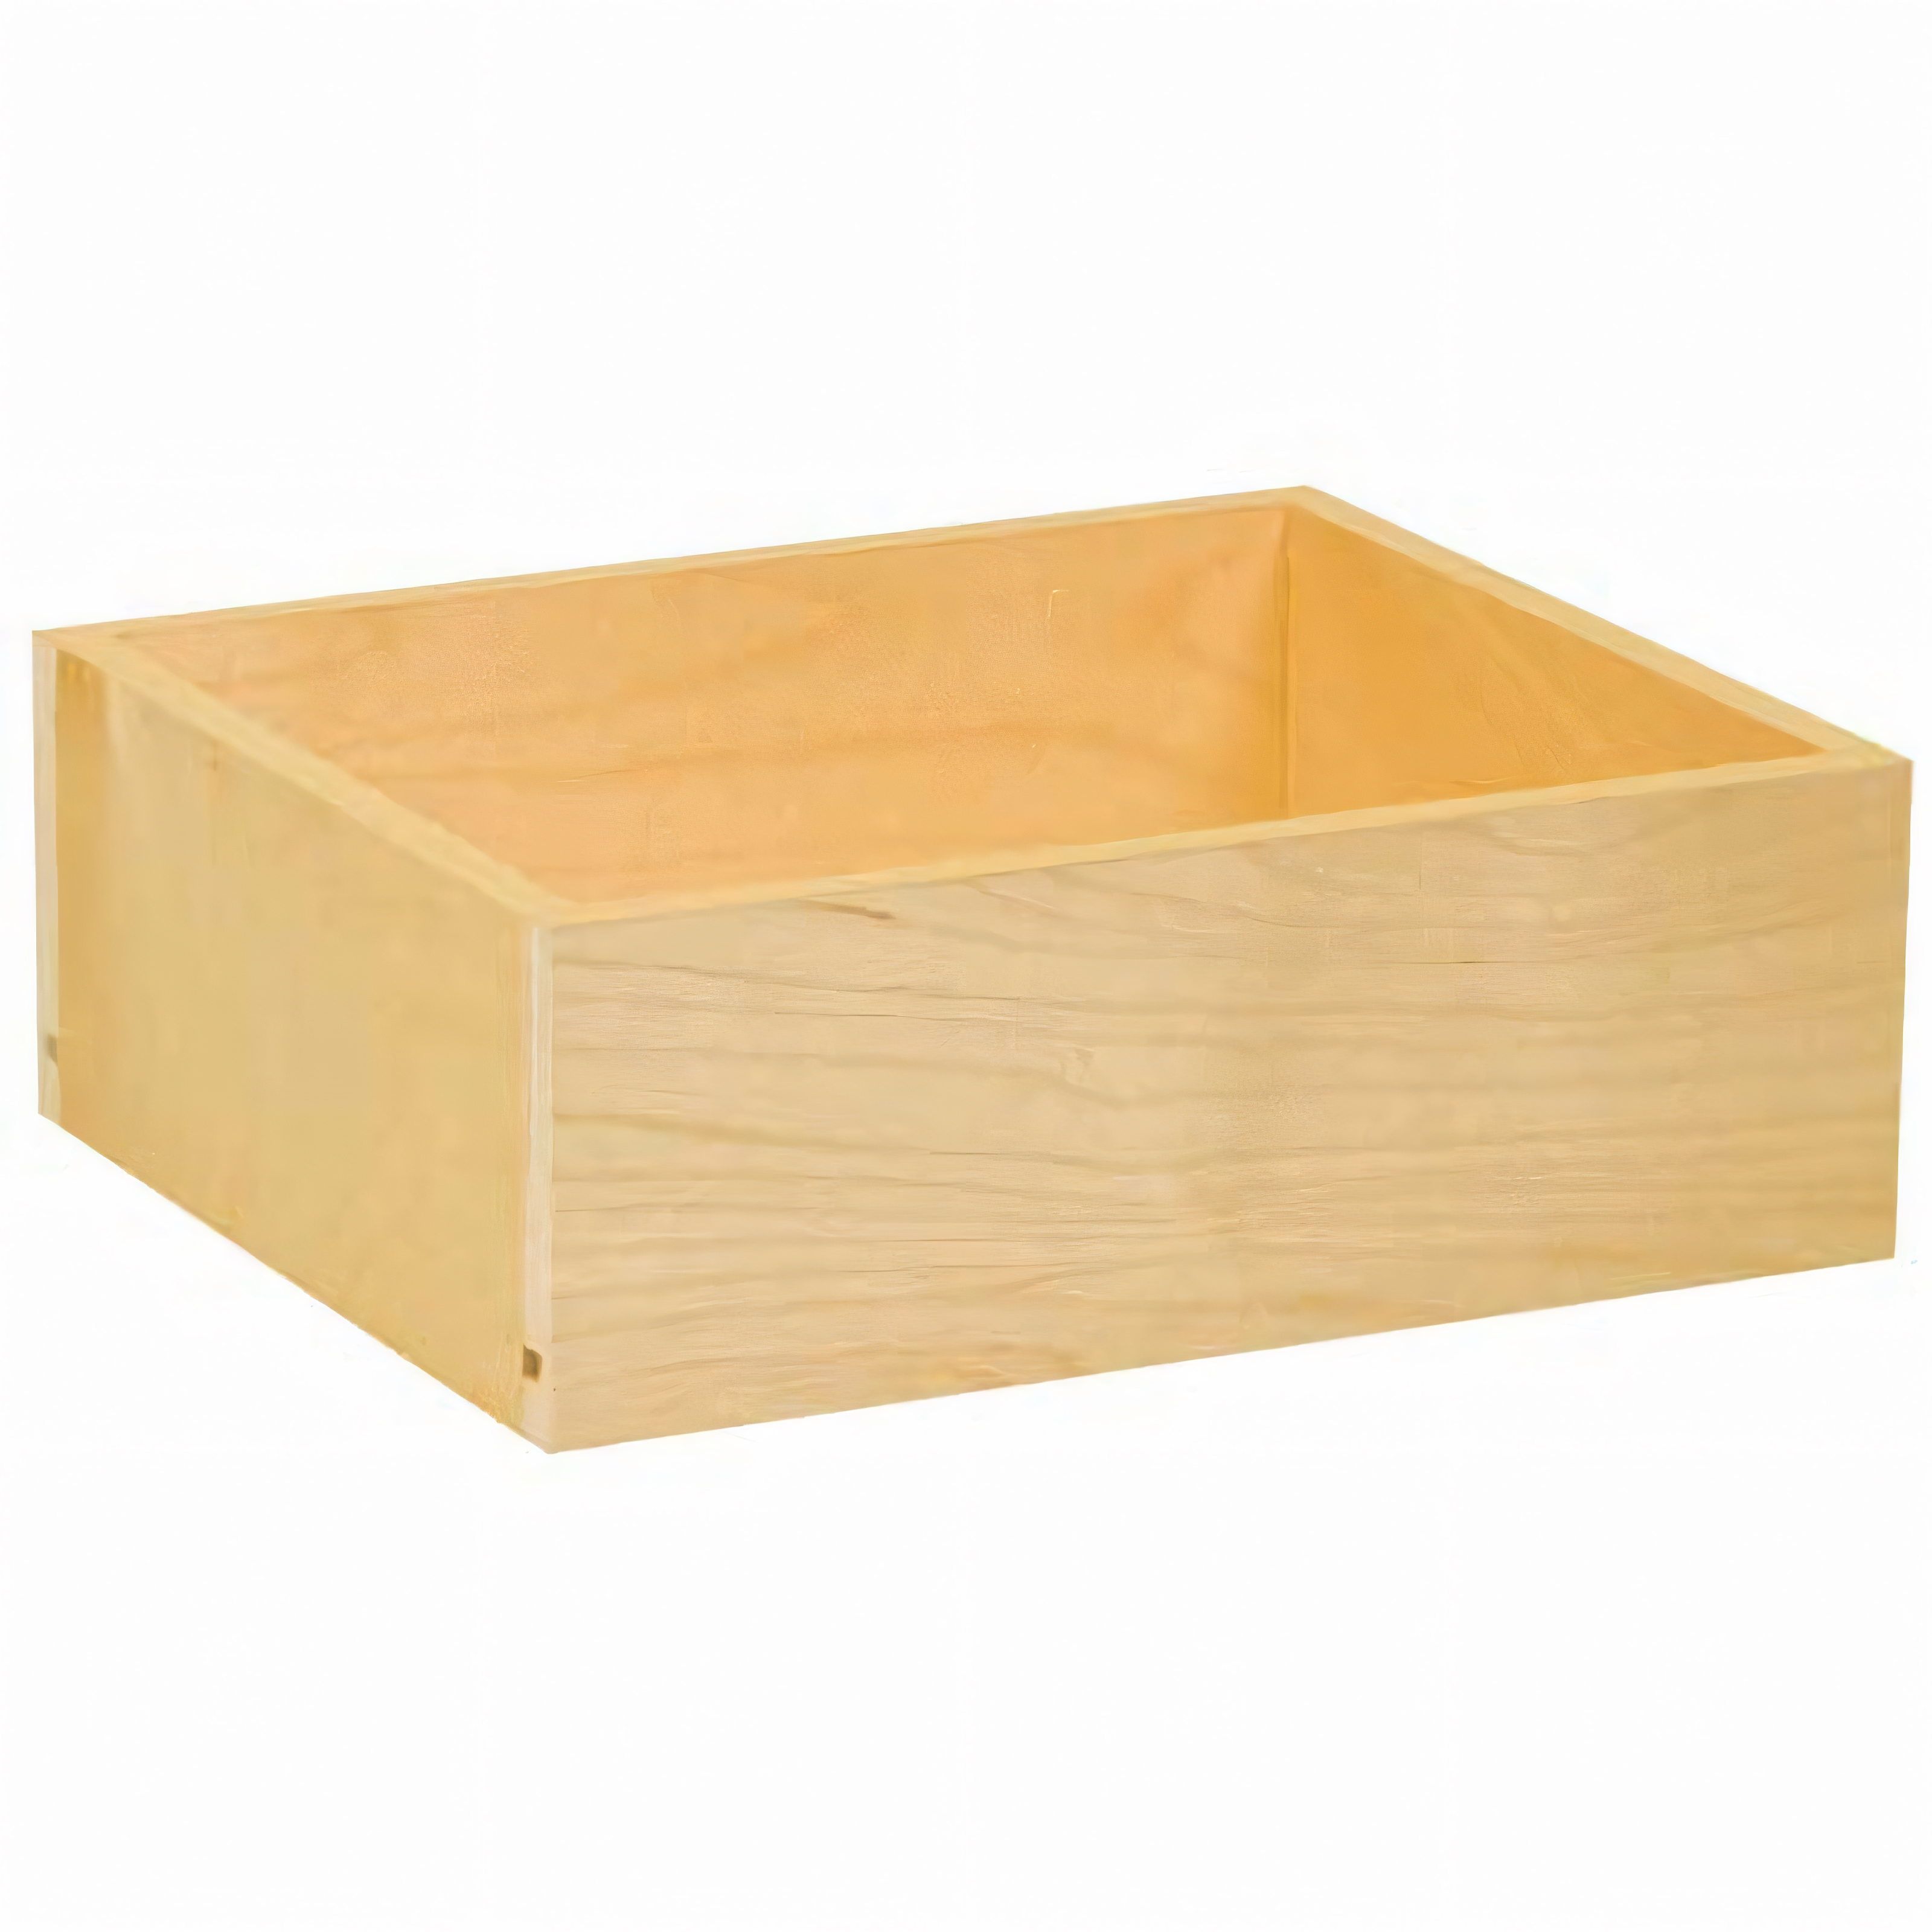 9 Ply Birch Drawer Box with Doweled Construction